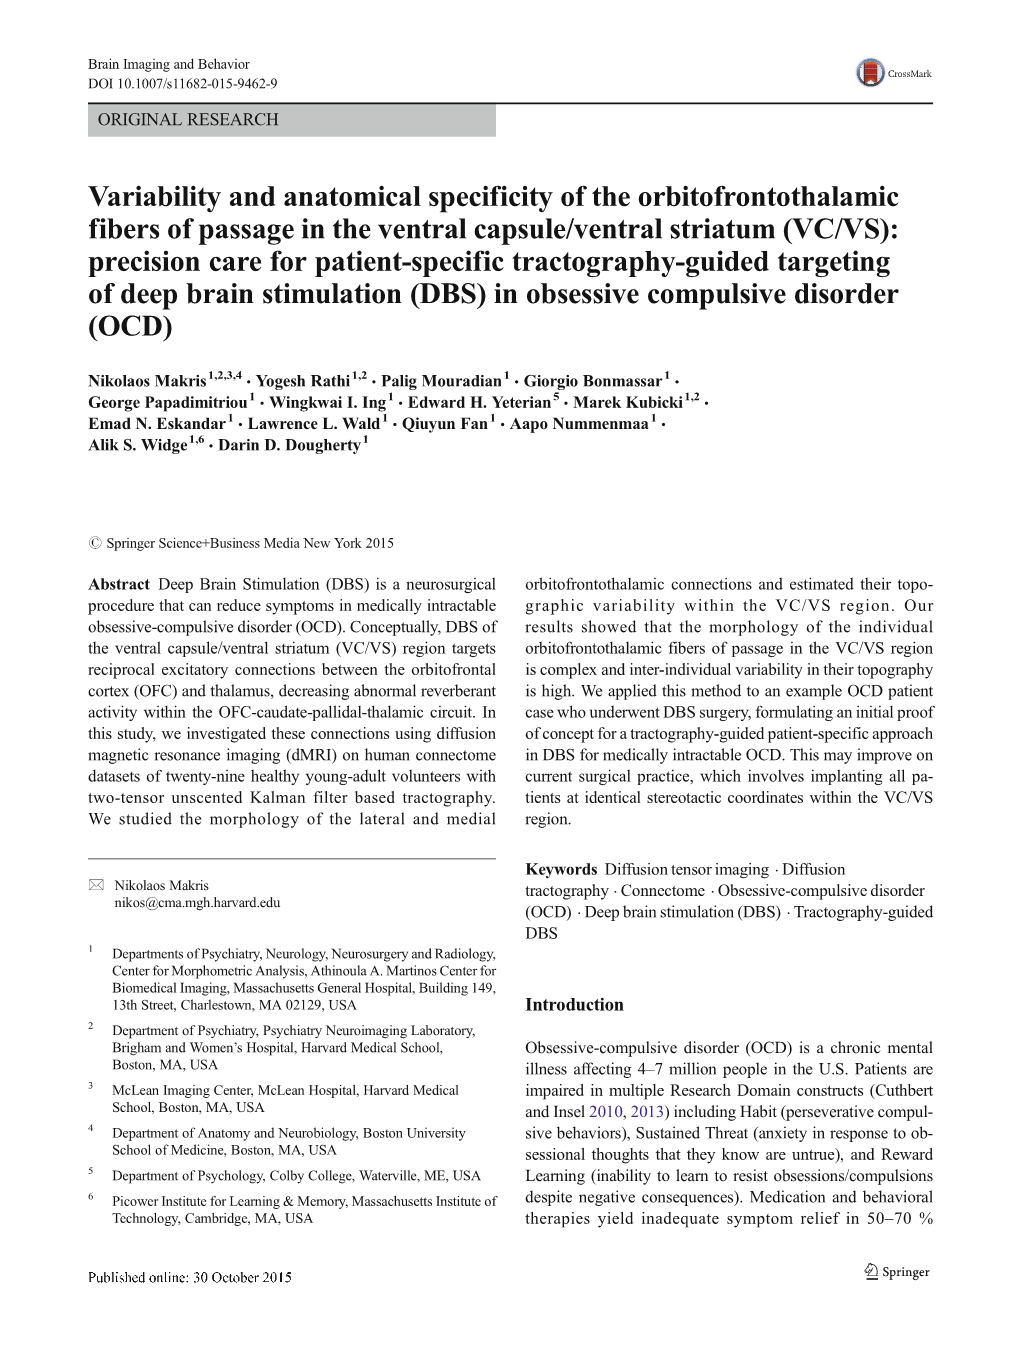 Variability and Anatomical Specificity of the Orbitofrontothalamic